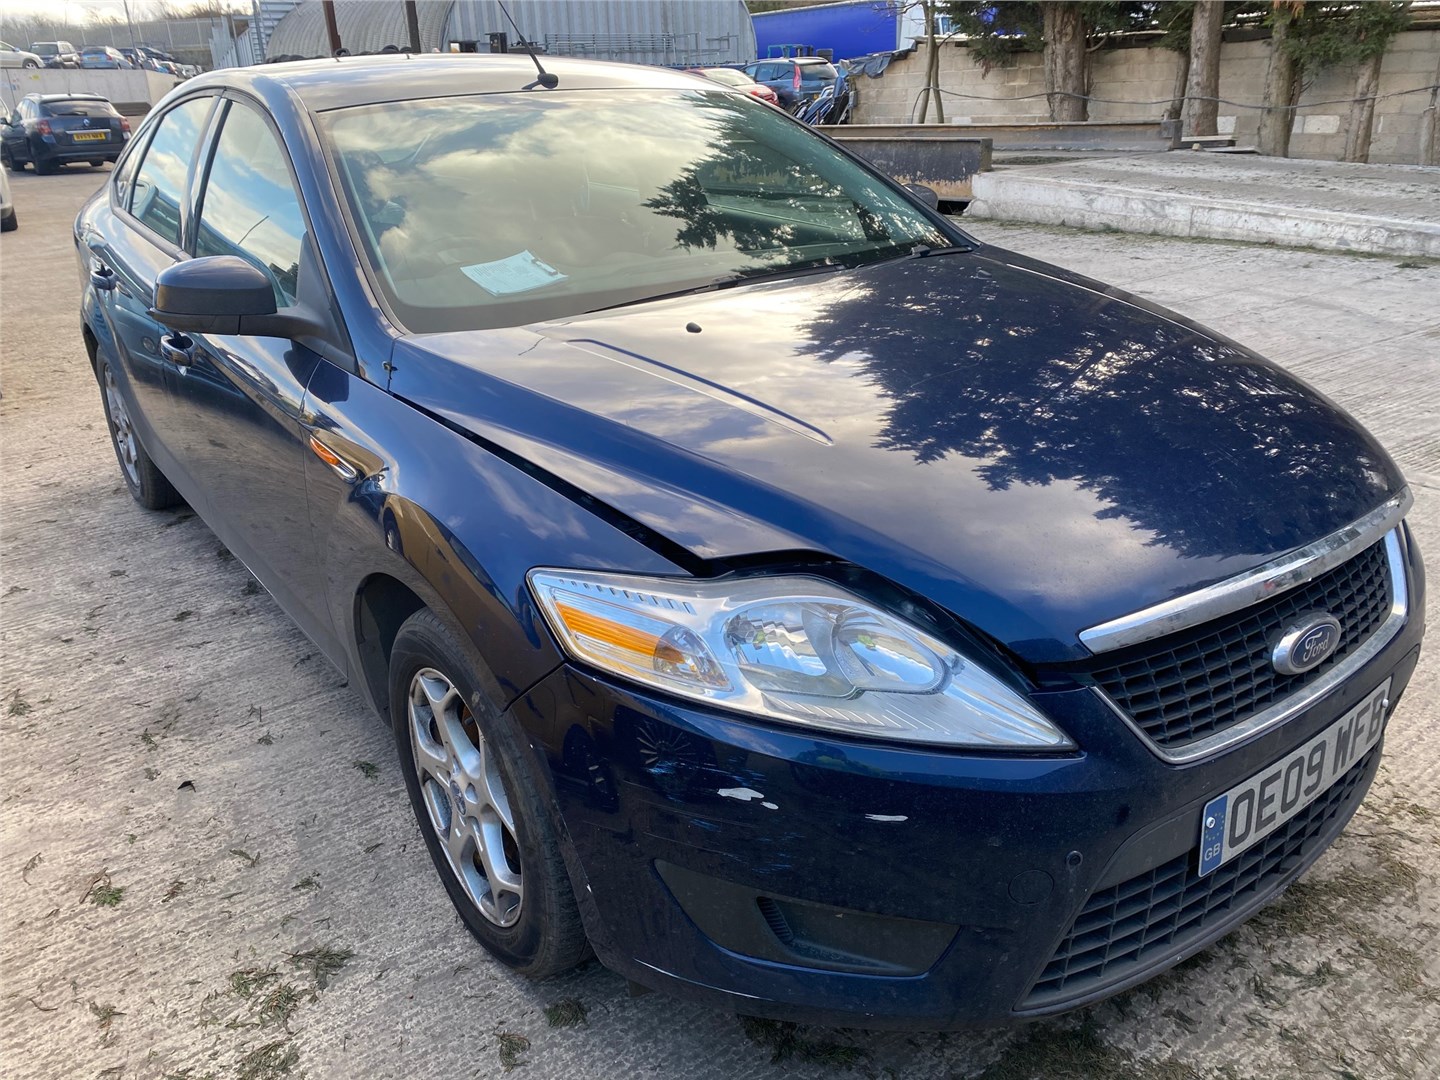 6G916K683A Патрубок интеркулера Ford Mondeo 4 2007-2015 2009